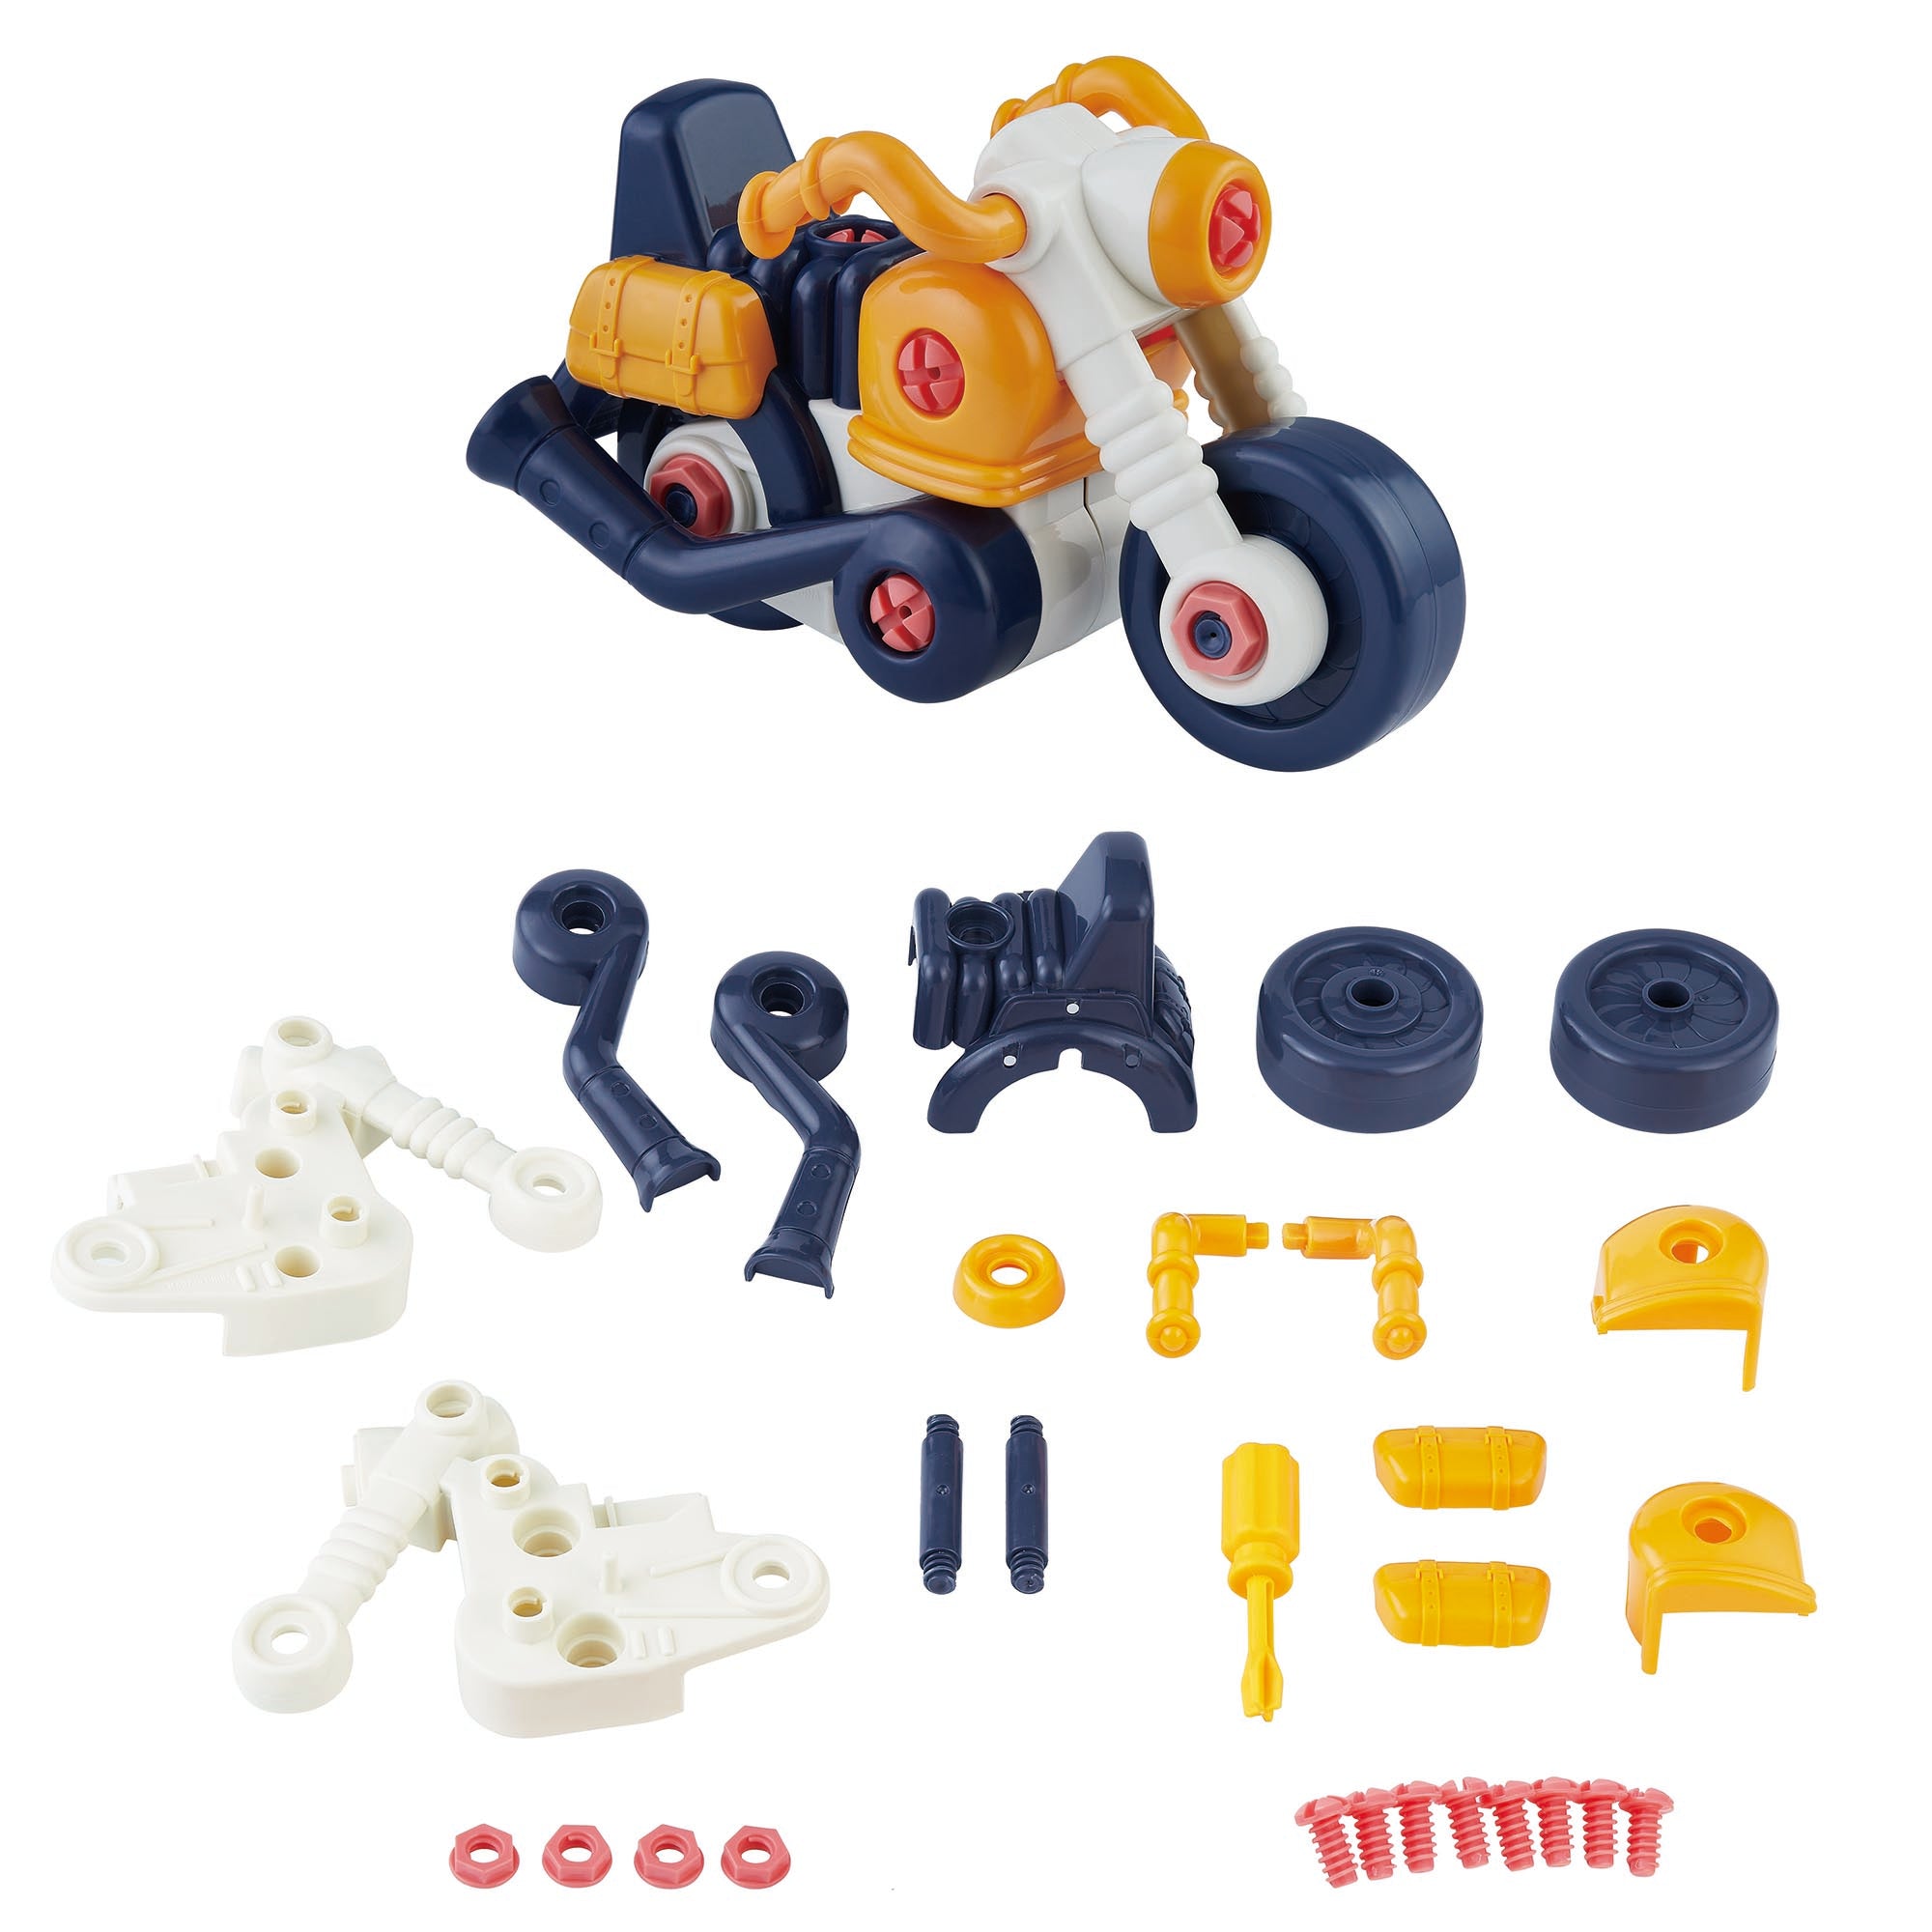 My World My Play Build Your Own Vehicle Set – Toysmith